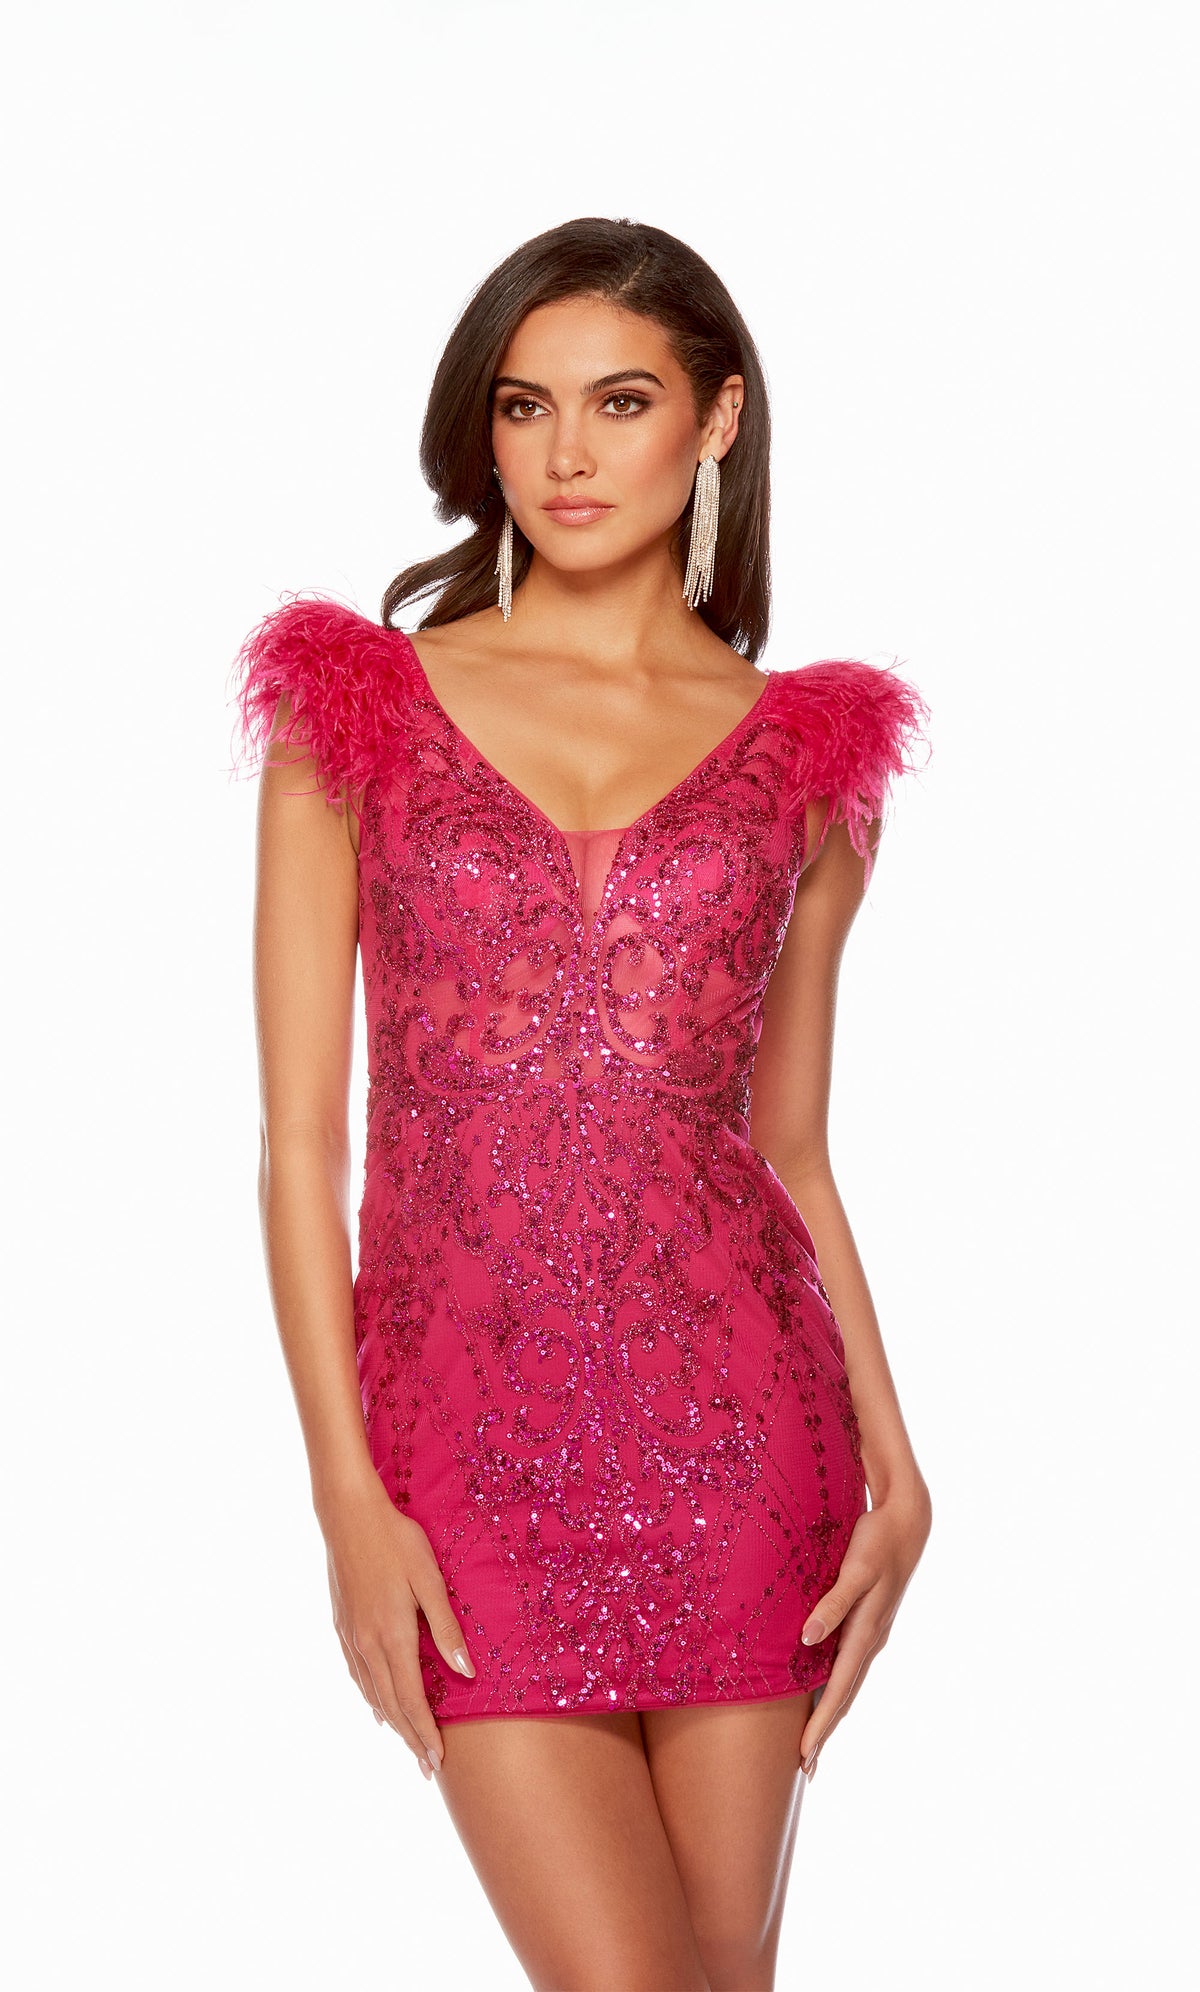 A vibrant pink homecoming dress with a plunging neckline, sheer bodice, and feather-accented sleeves.